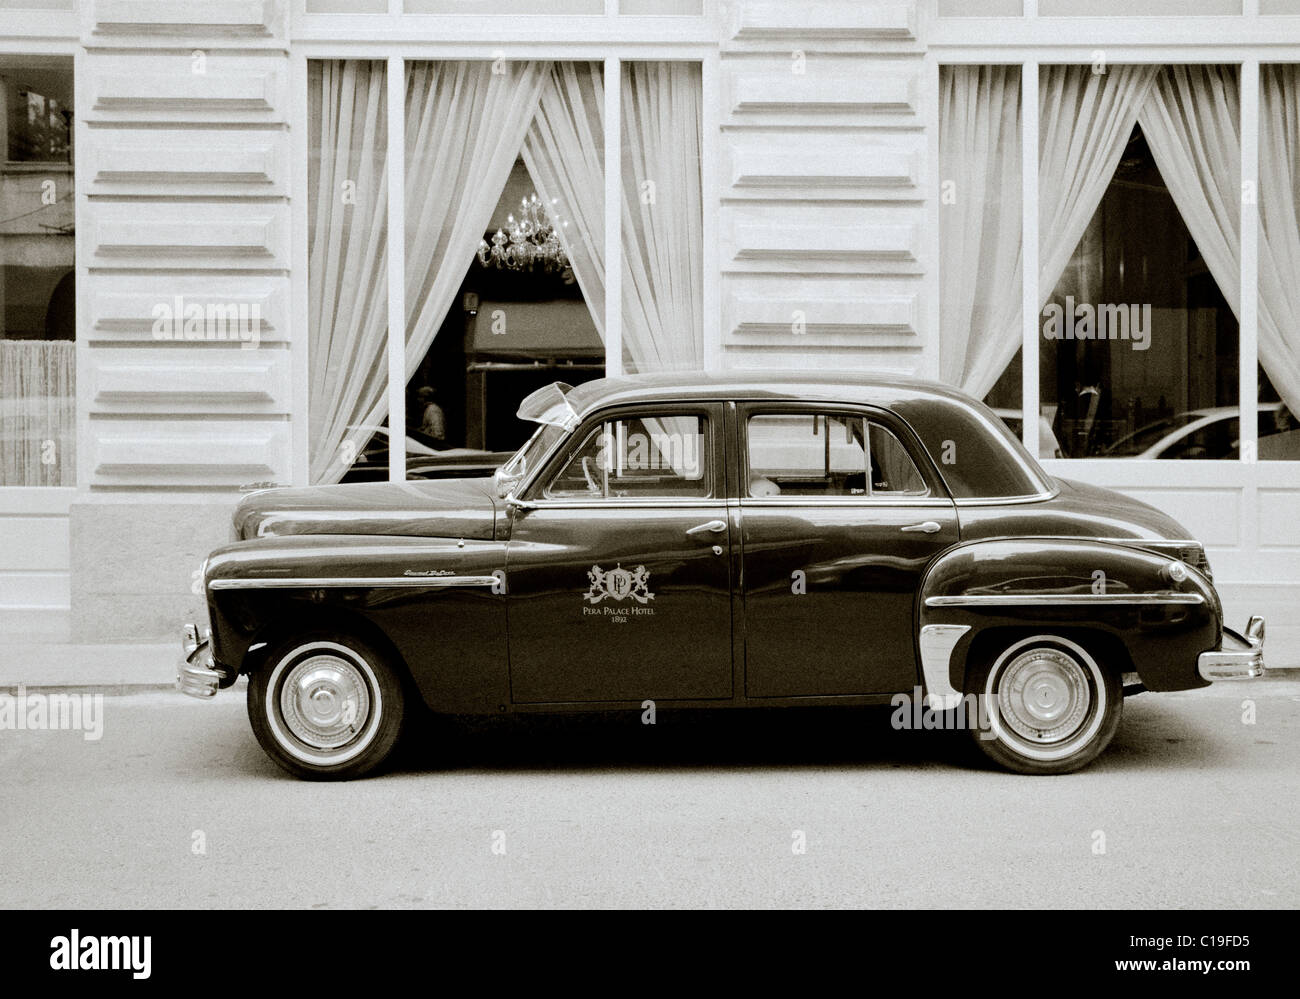 Classic car outside the Pera Palace Hotel in Istanbul in Turkey in Middle East Asia. Vintage Cars Wealth Wealthy Luxury Turkish Black and White Travel Stock Photo